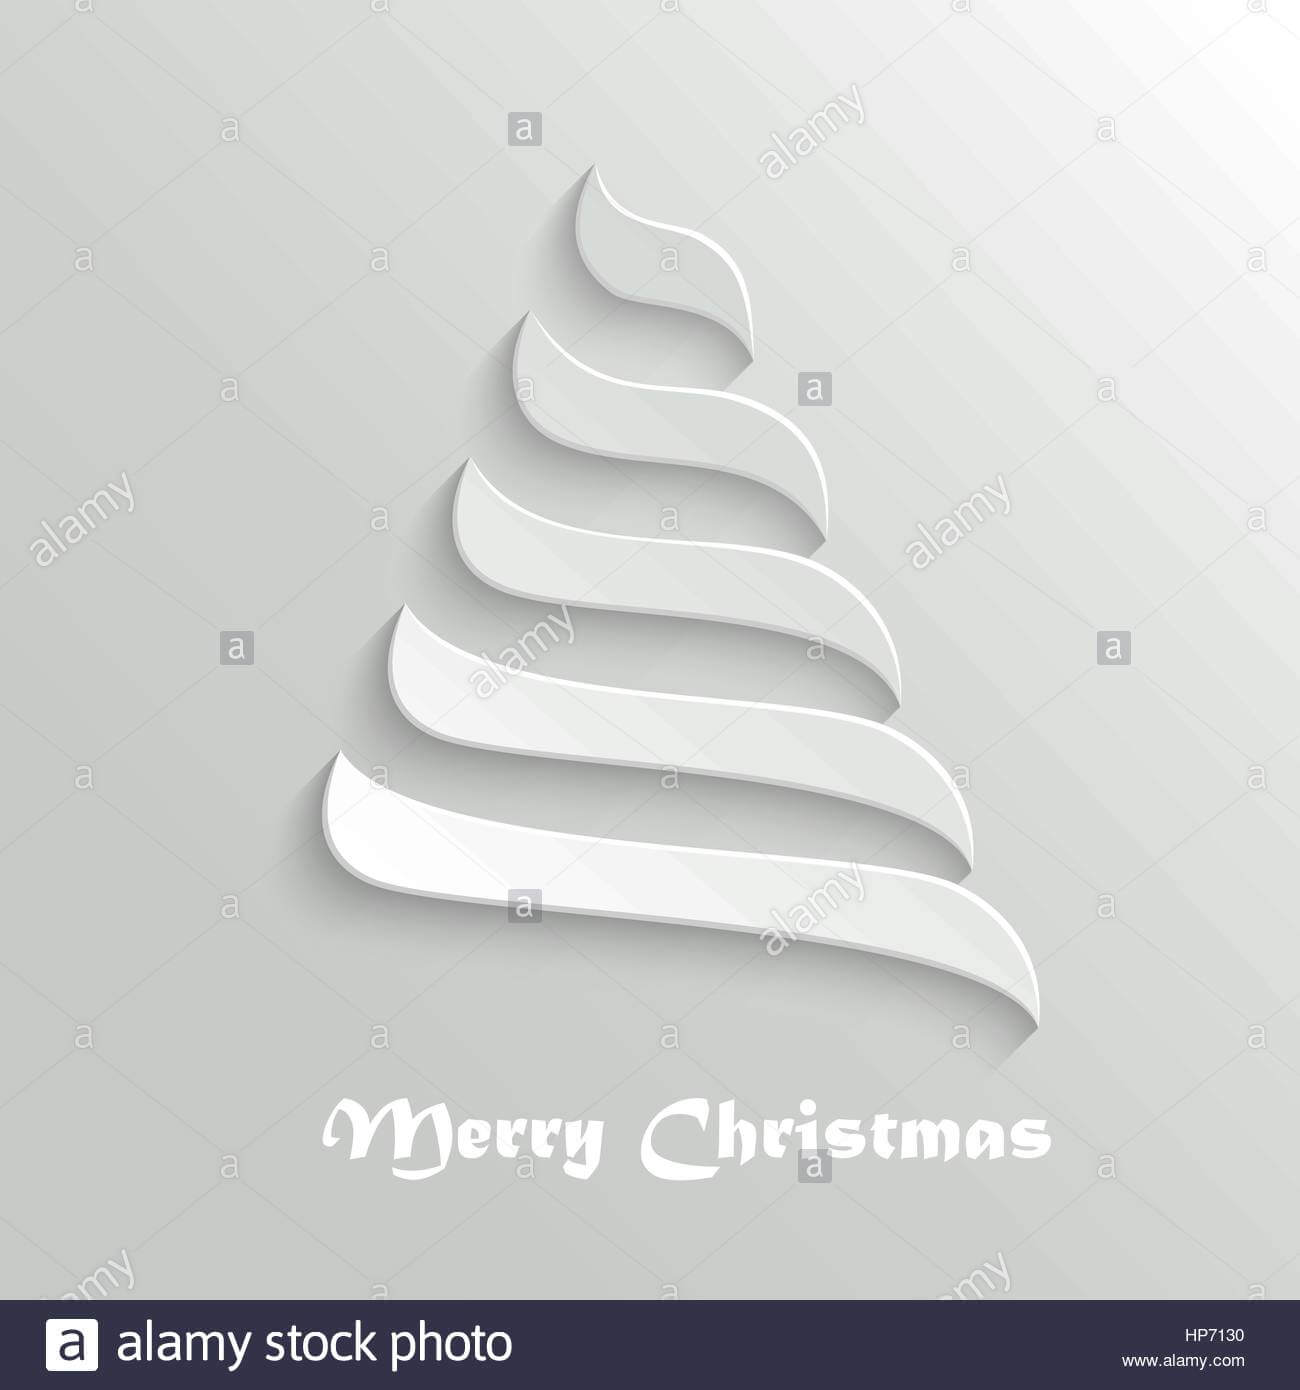 Christmas Tree – 3D Abstract New Year Symbol. Greeting Card With 3D Christmas Tree Card Template